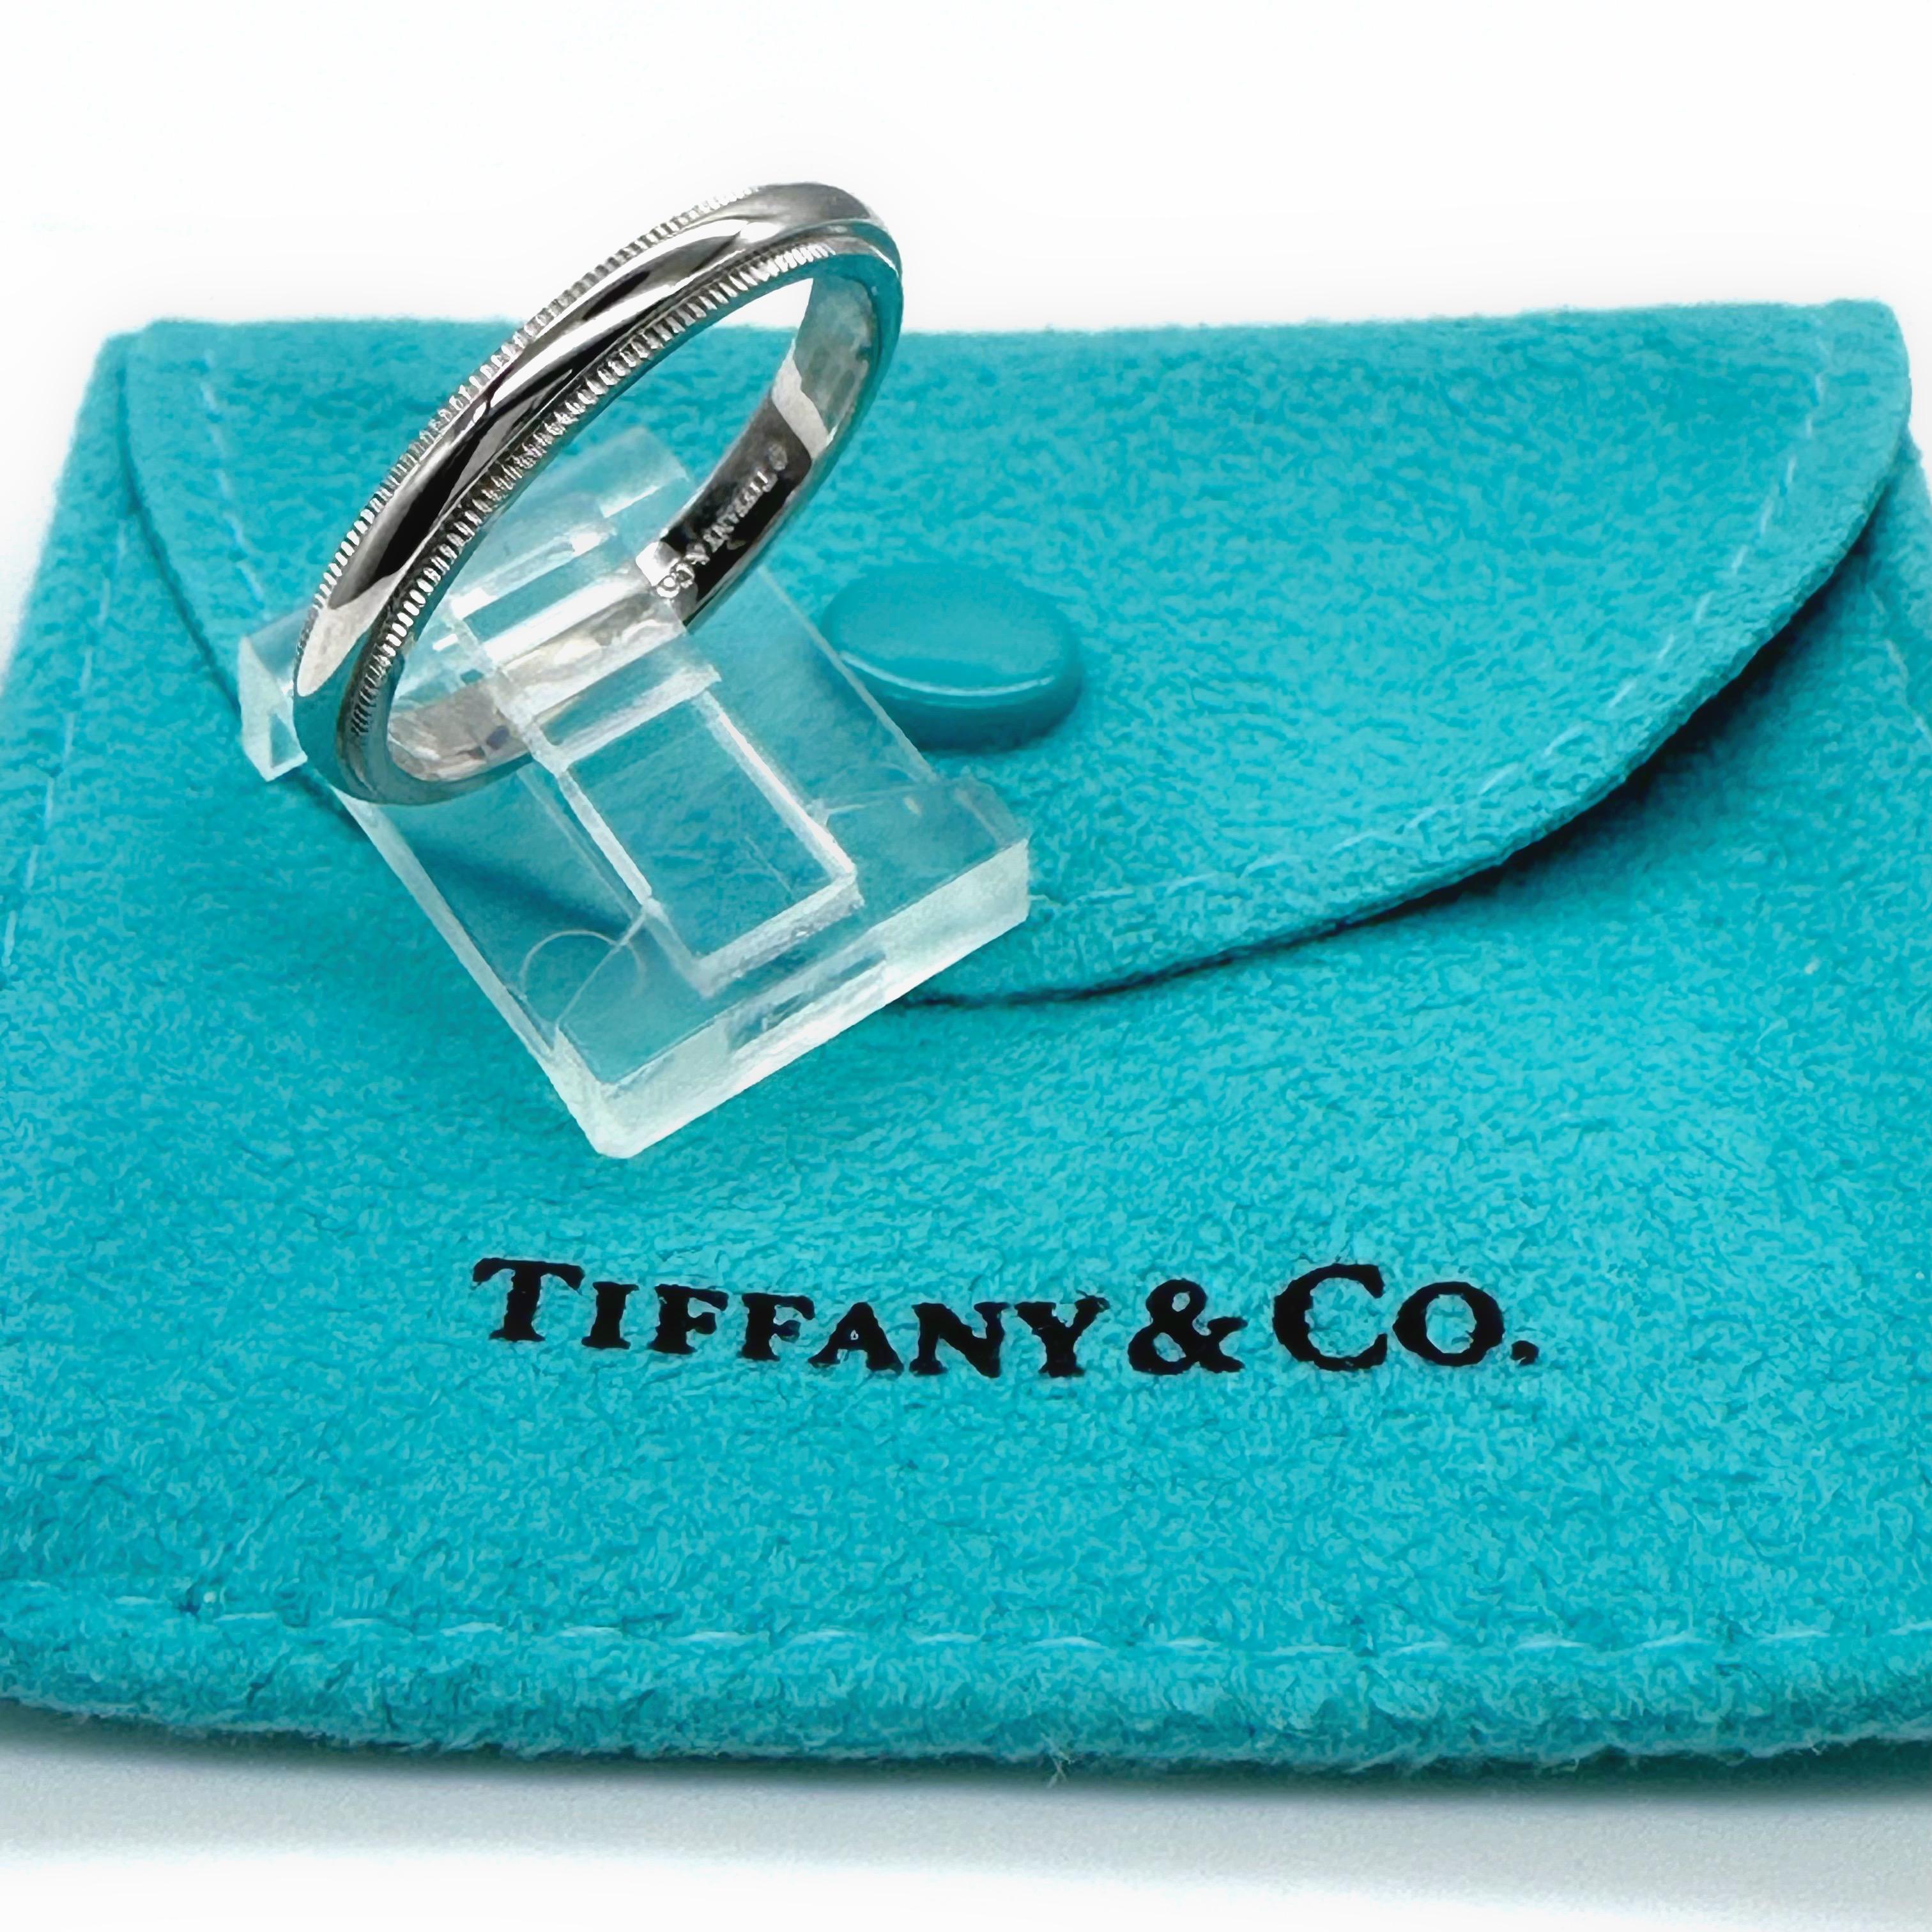 Tiffany & Co. Together Milgrain Band Ring
Style:  Band
Ref. number:  60001759
Metal:  Platinum PT950
Size:  9.25
Measurements:  3 mm
Hallmark:  ©TIFFANY&CO. PT950
Includes:  T&C Ring Pouch
Retail:  $1,500

Sku#1900TERL04212023